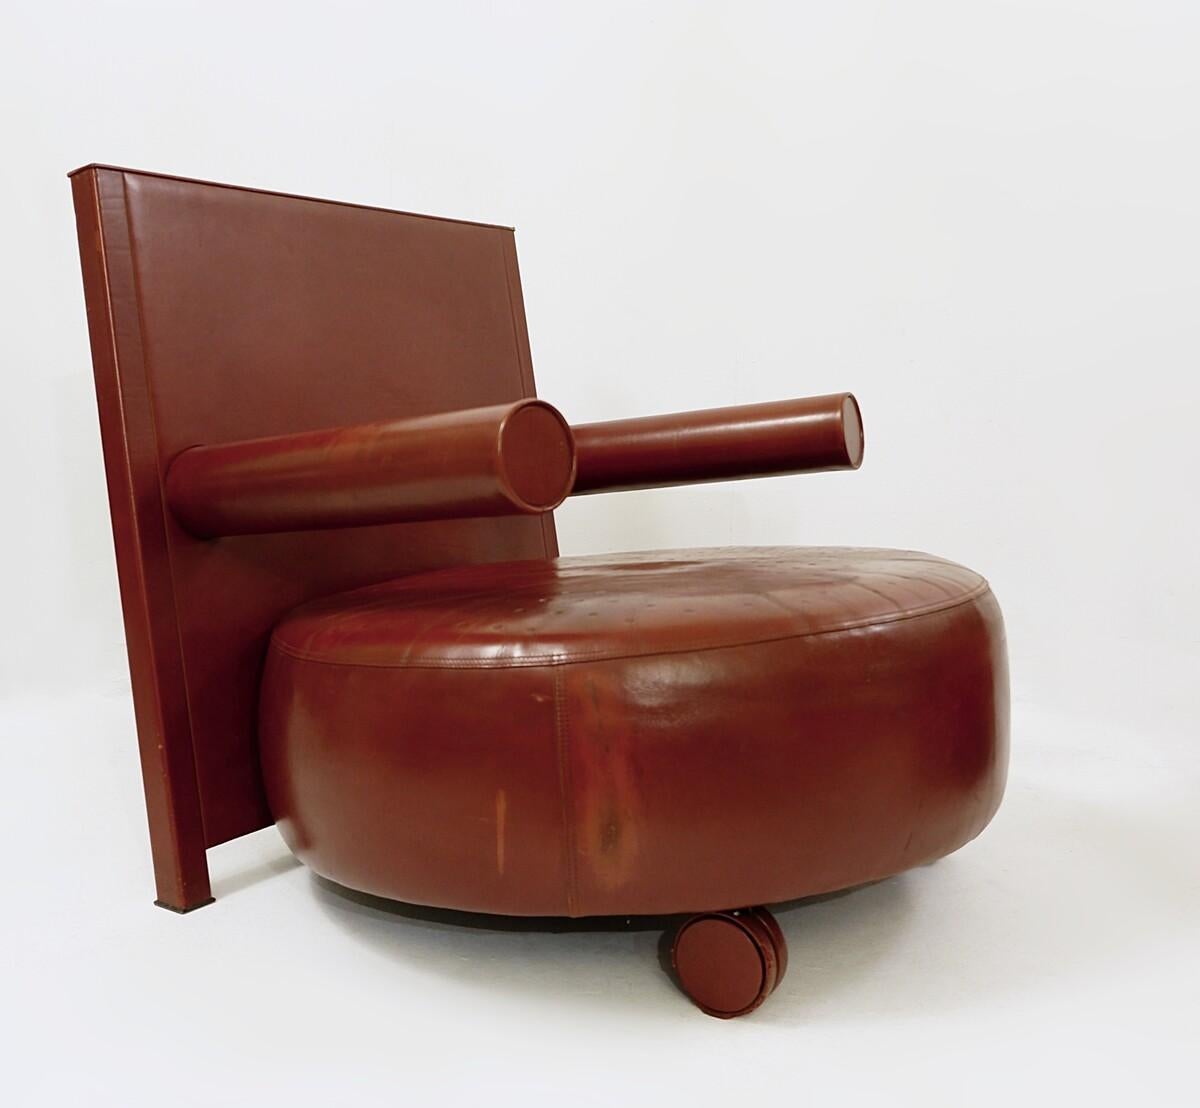 Leather 'Baisity' Lounge Chair by Antonio Citterio for B&B Italia, 1980s